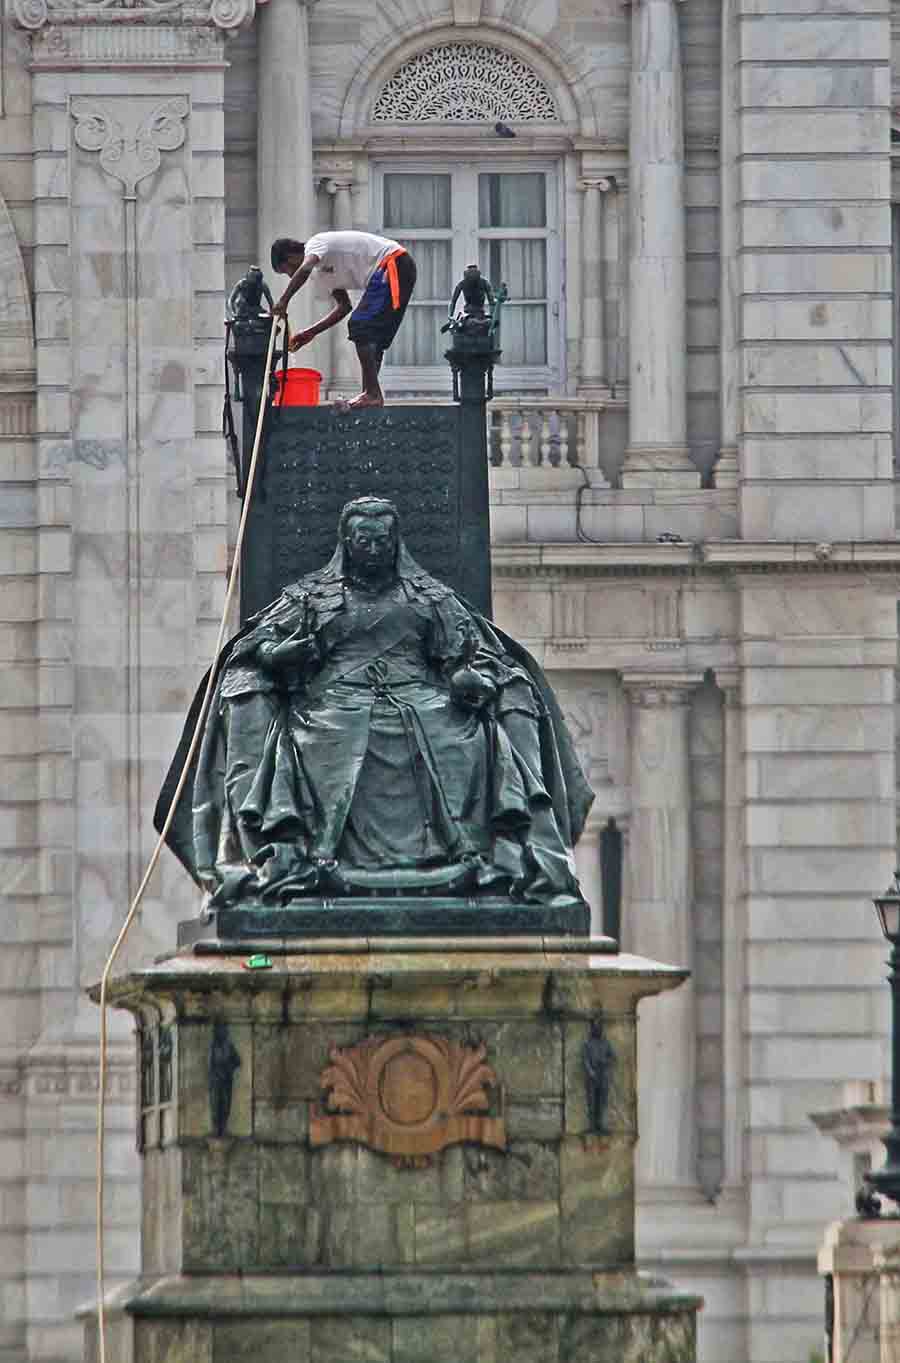 A worker cleans the statue of Queen Victoria on Wednesday  